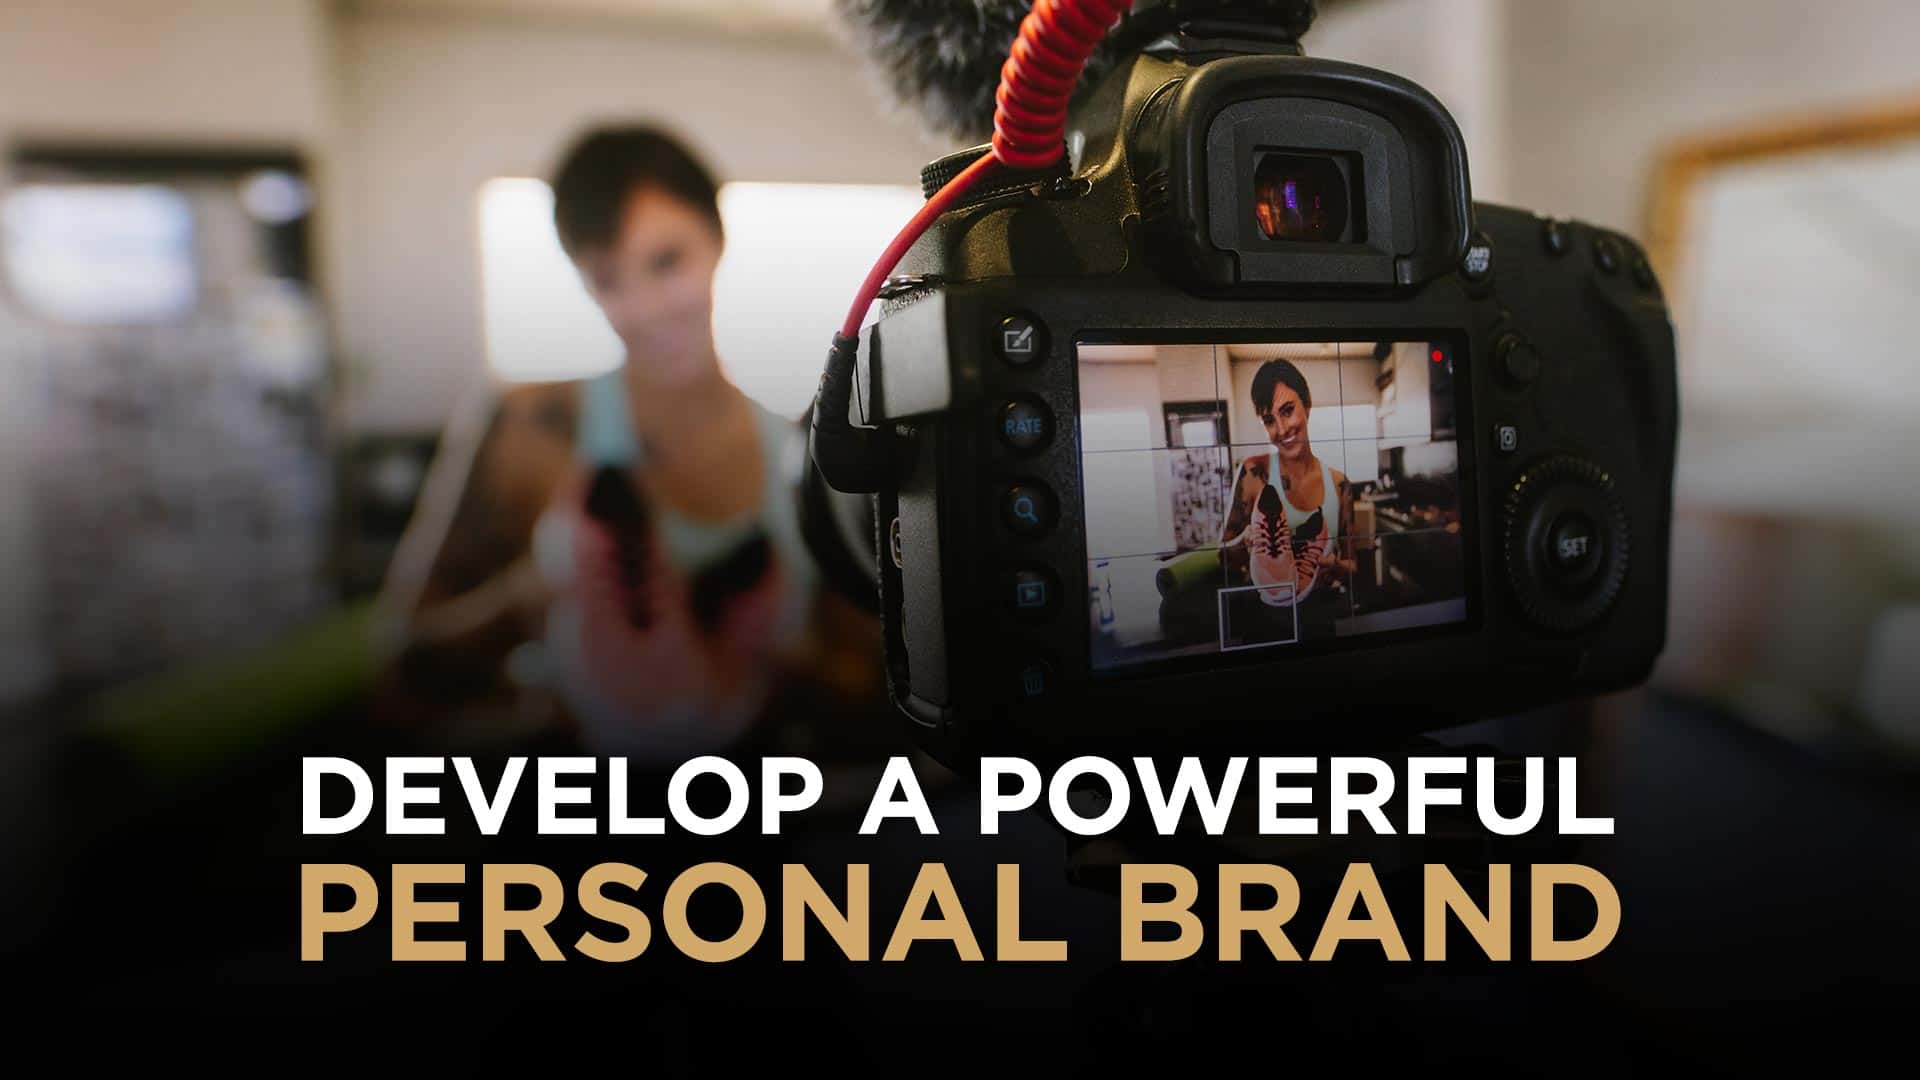 Develop-A-Powerful-Personal-Brand-With-These-3-Secrets